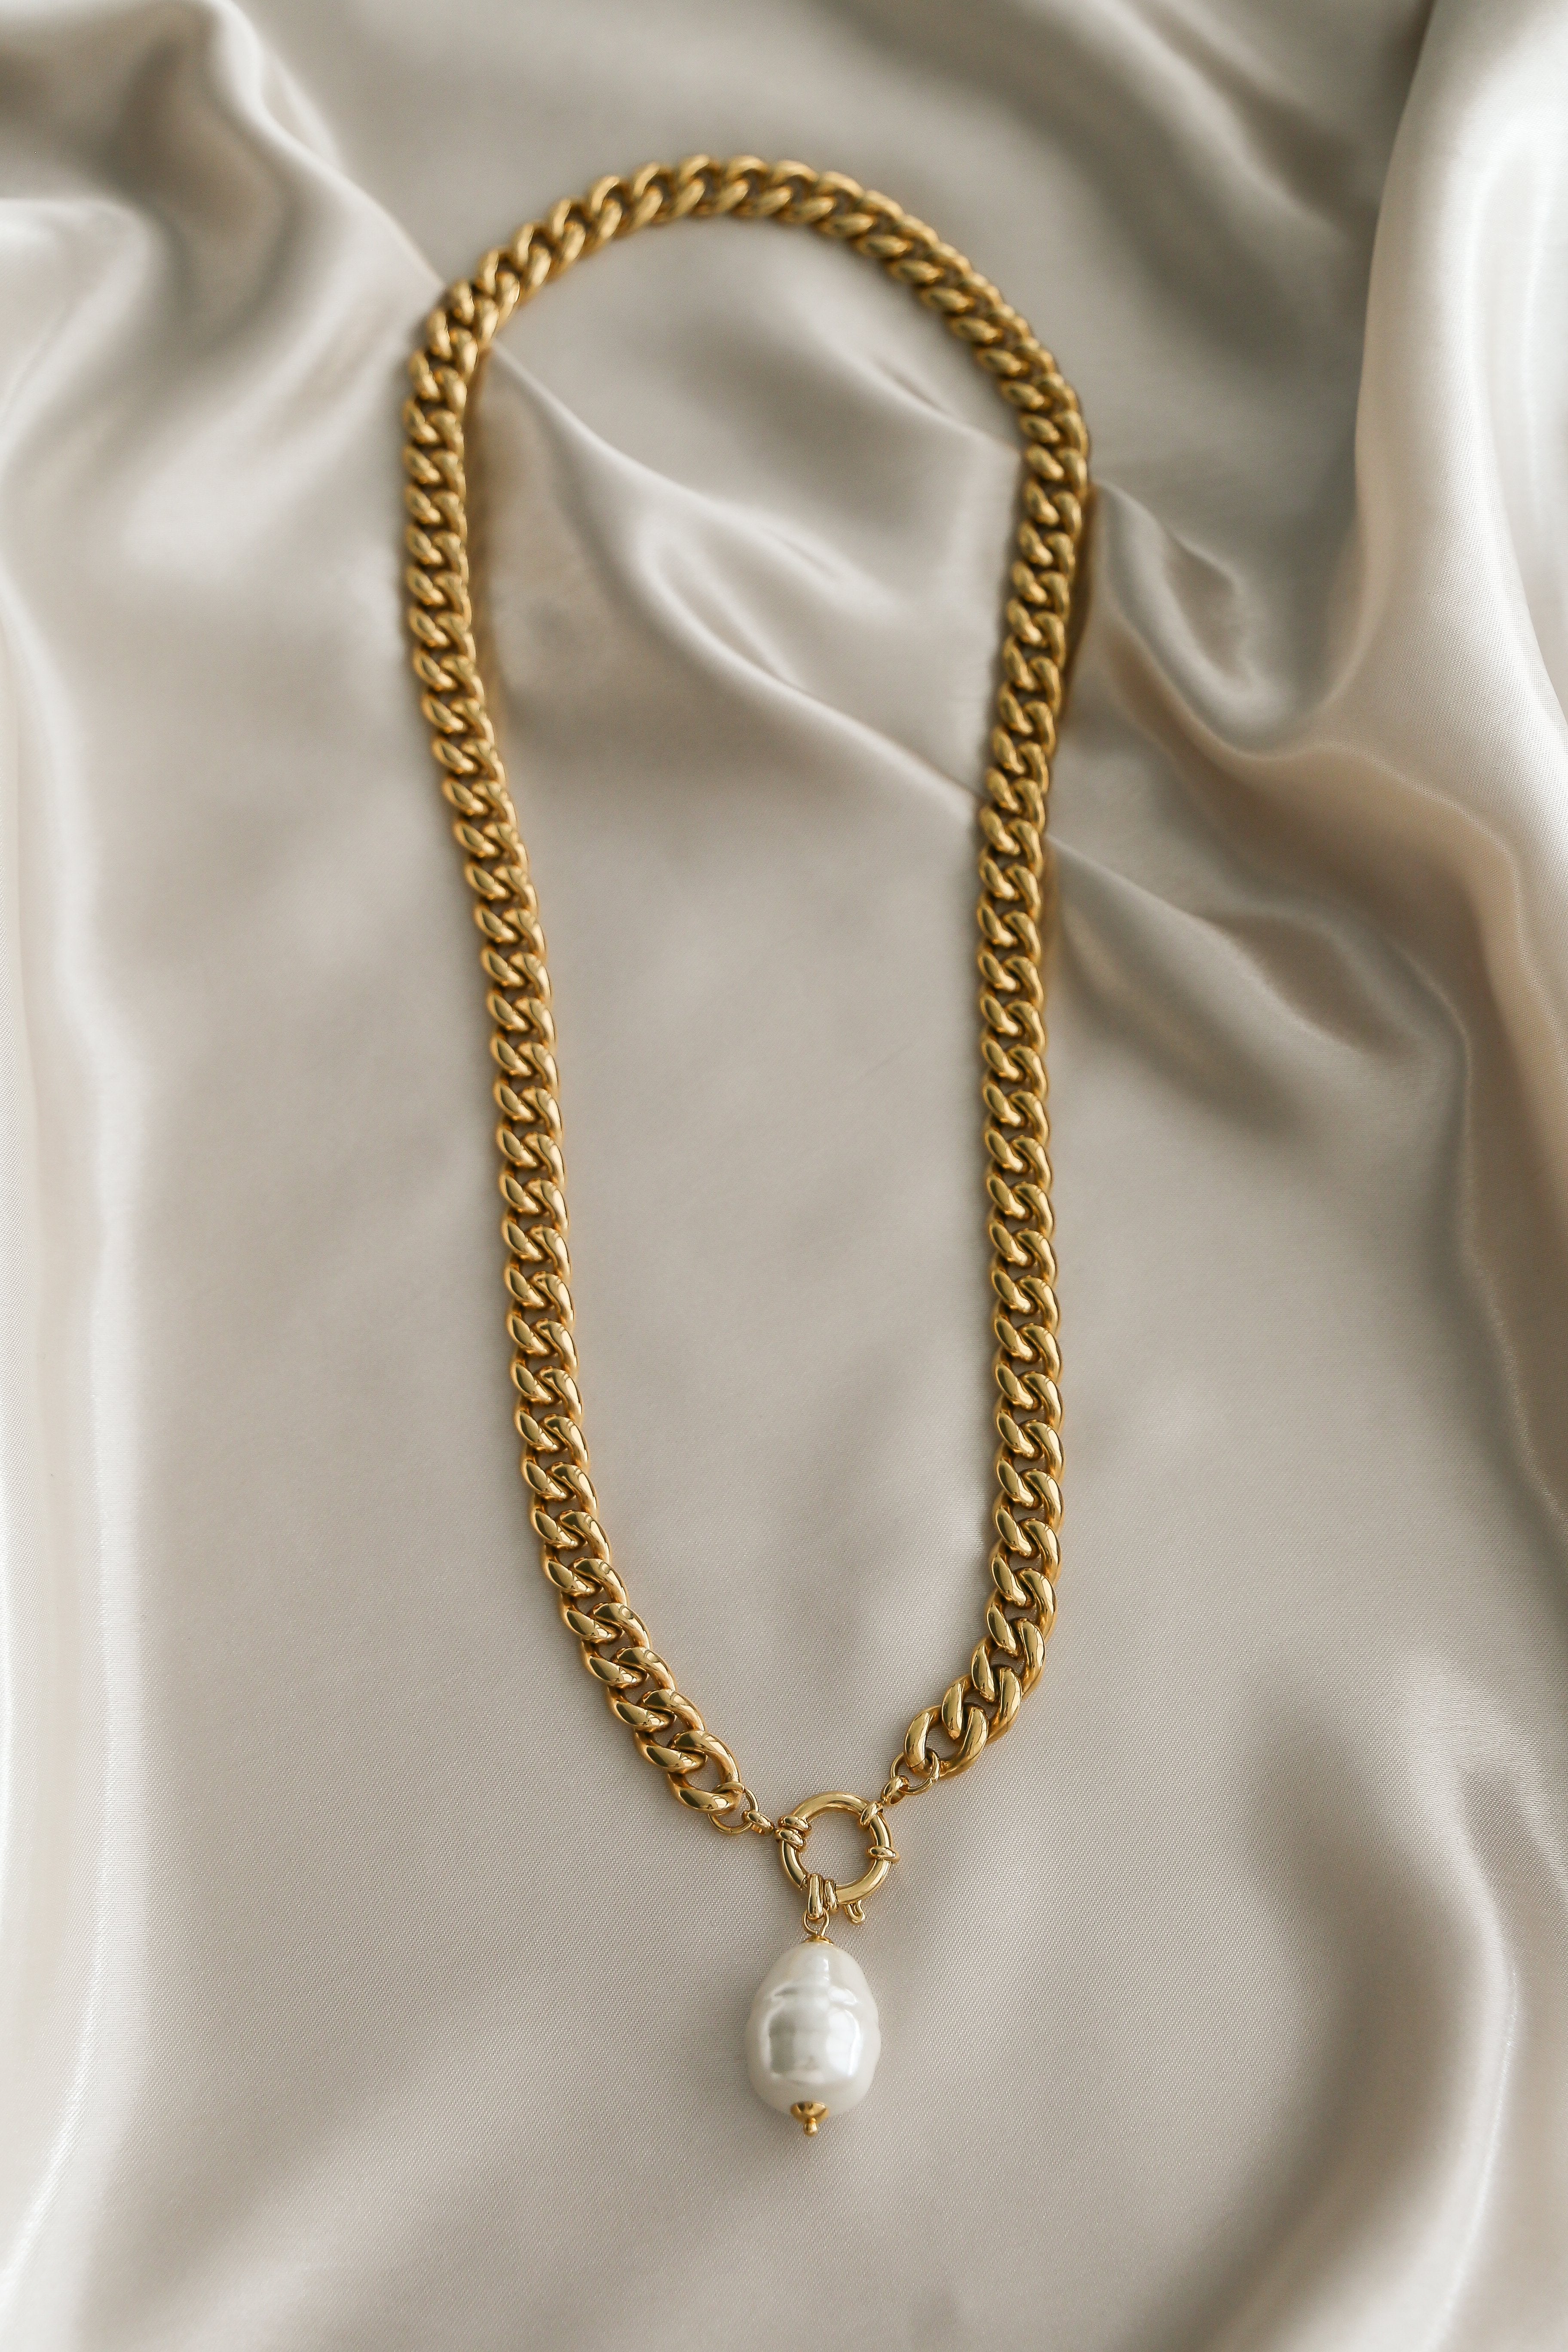 Dolce Necklace - Boutique Minimaliste has waterproof, durable, elegant and vintage inspired jewelry